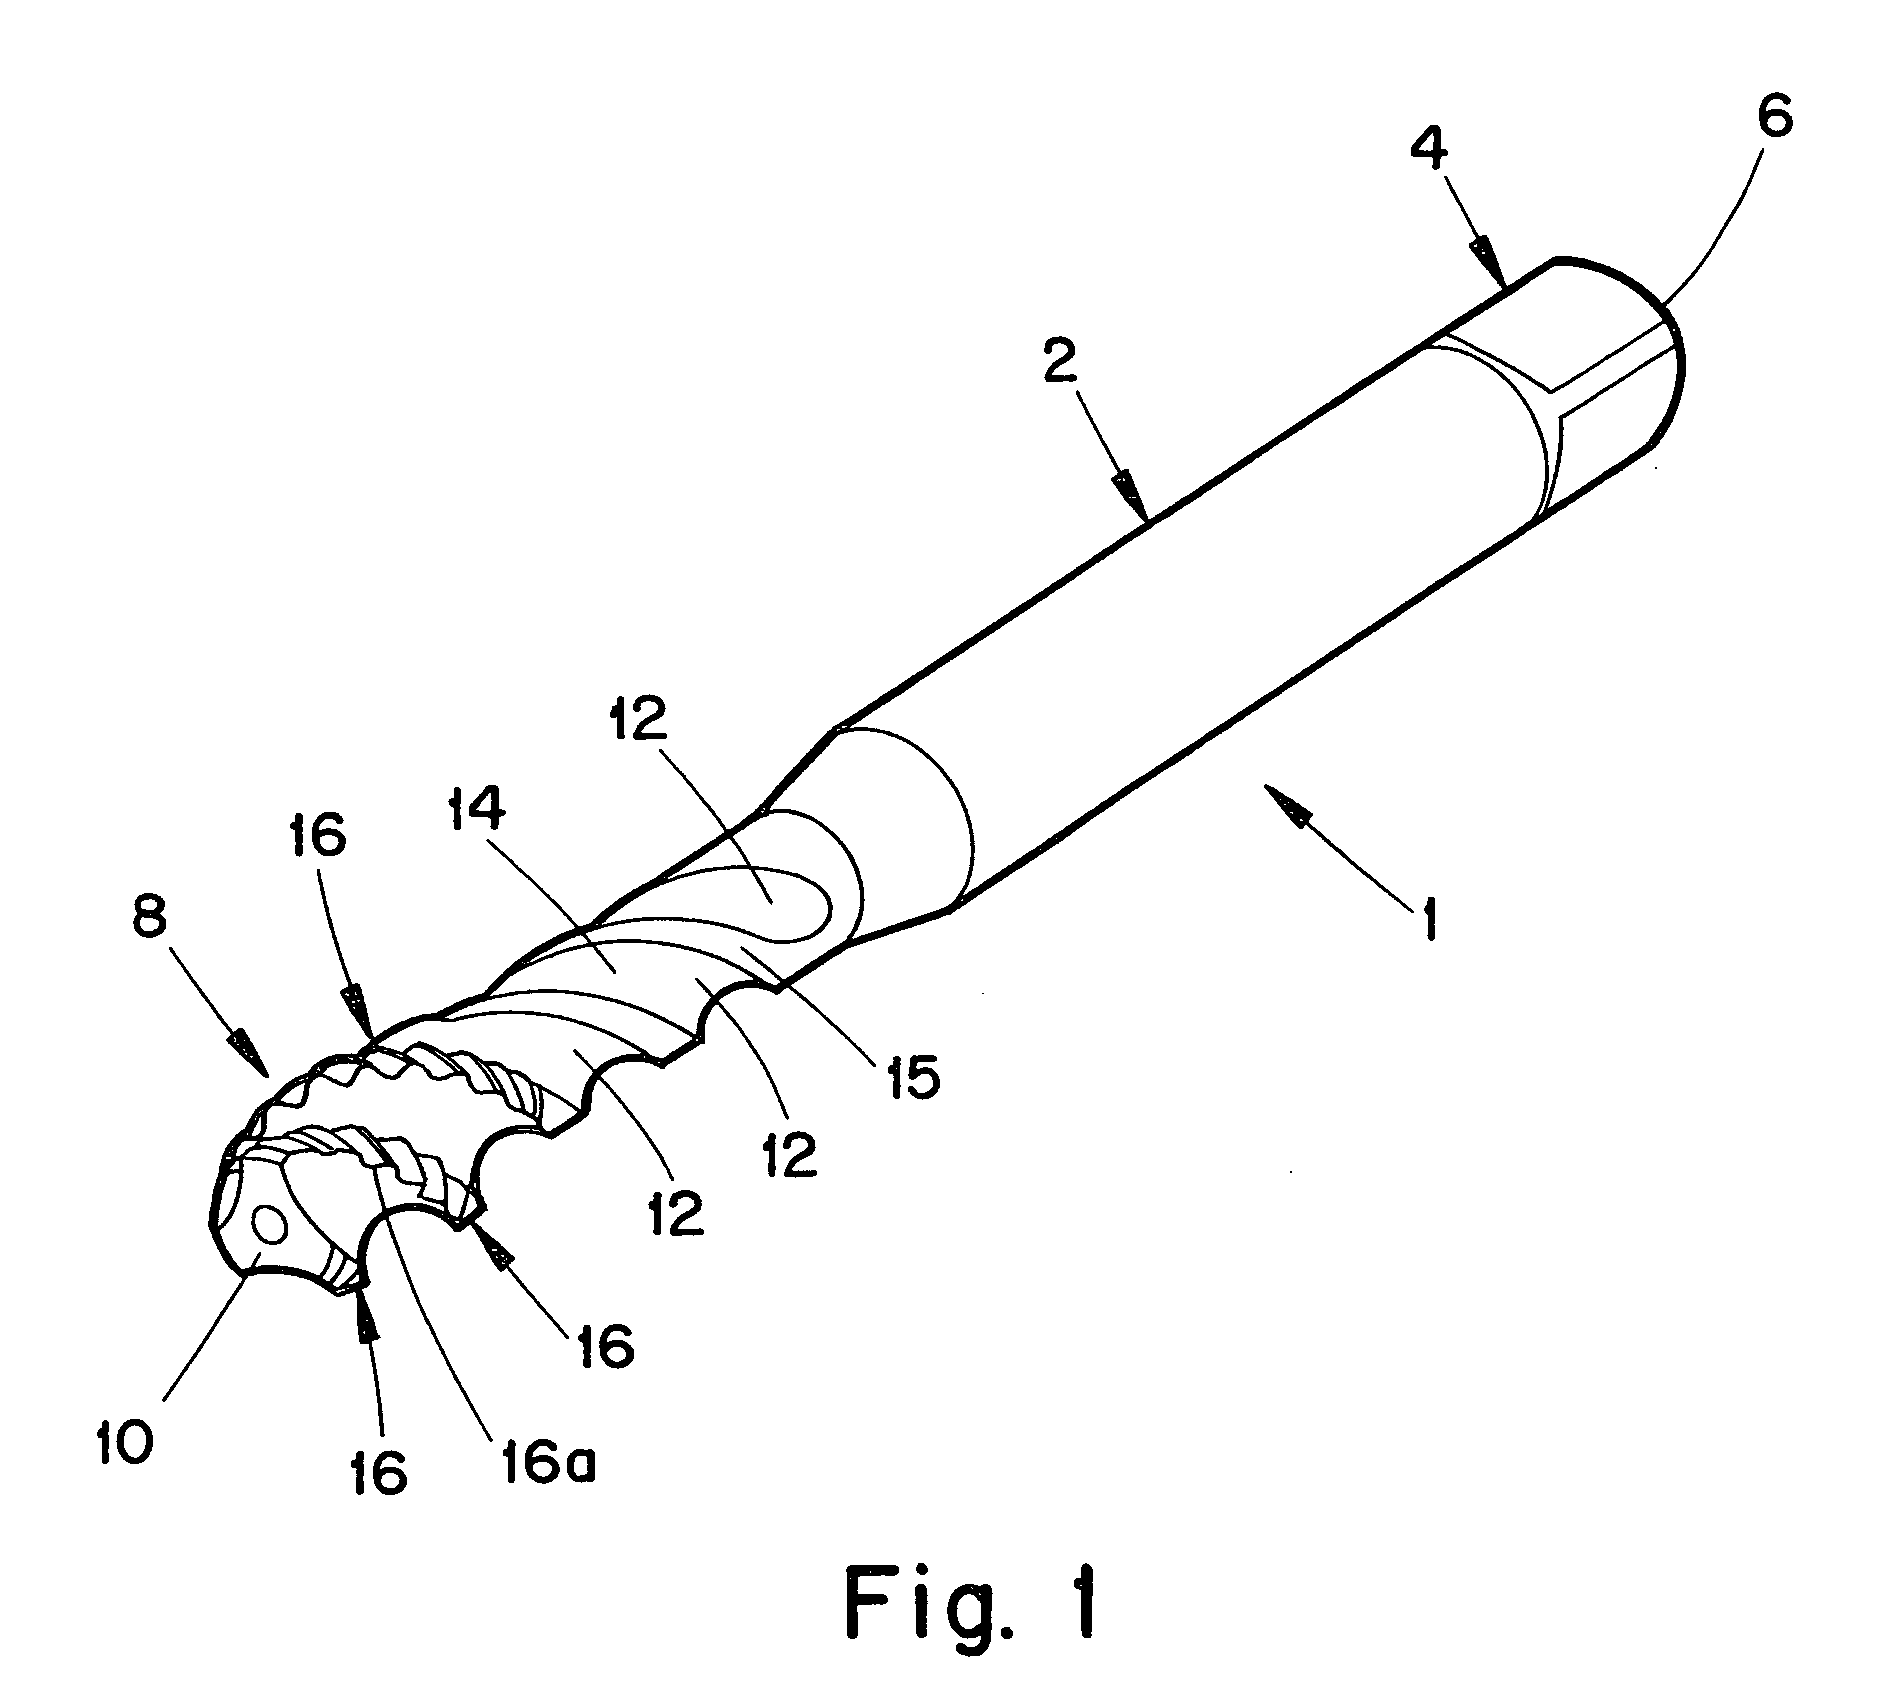 Threading tap for cutting threads in blind holes and methods of its manufacture